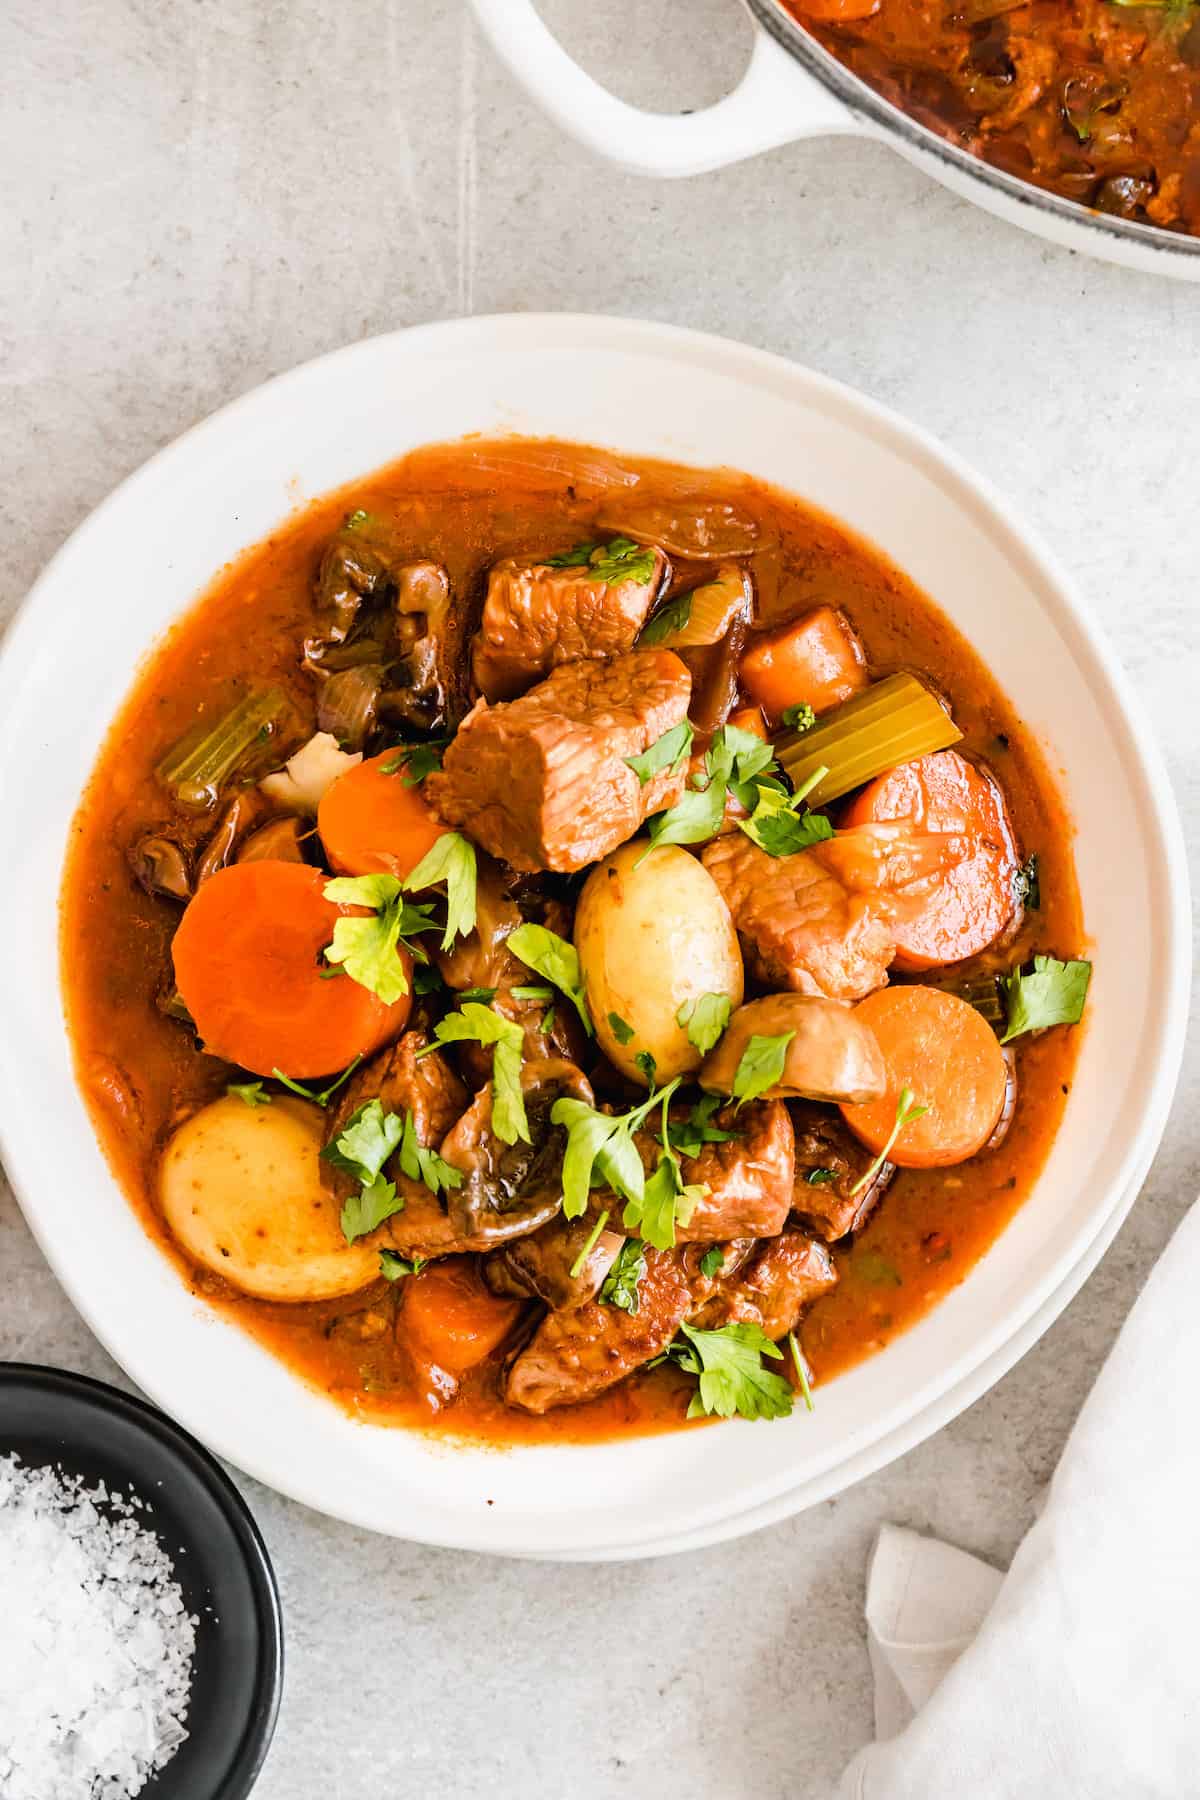 A bowl of beef stew with potatoes and carrots.